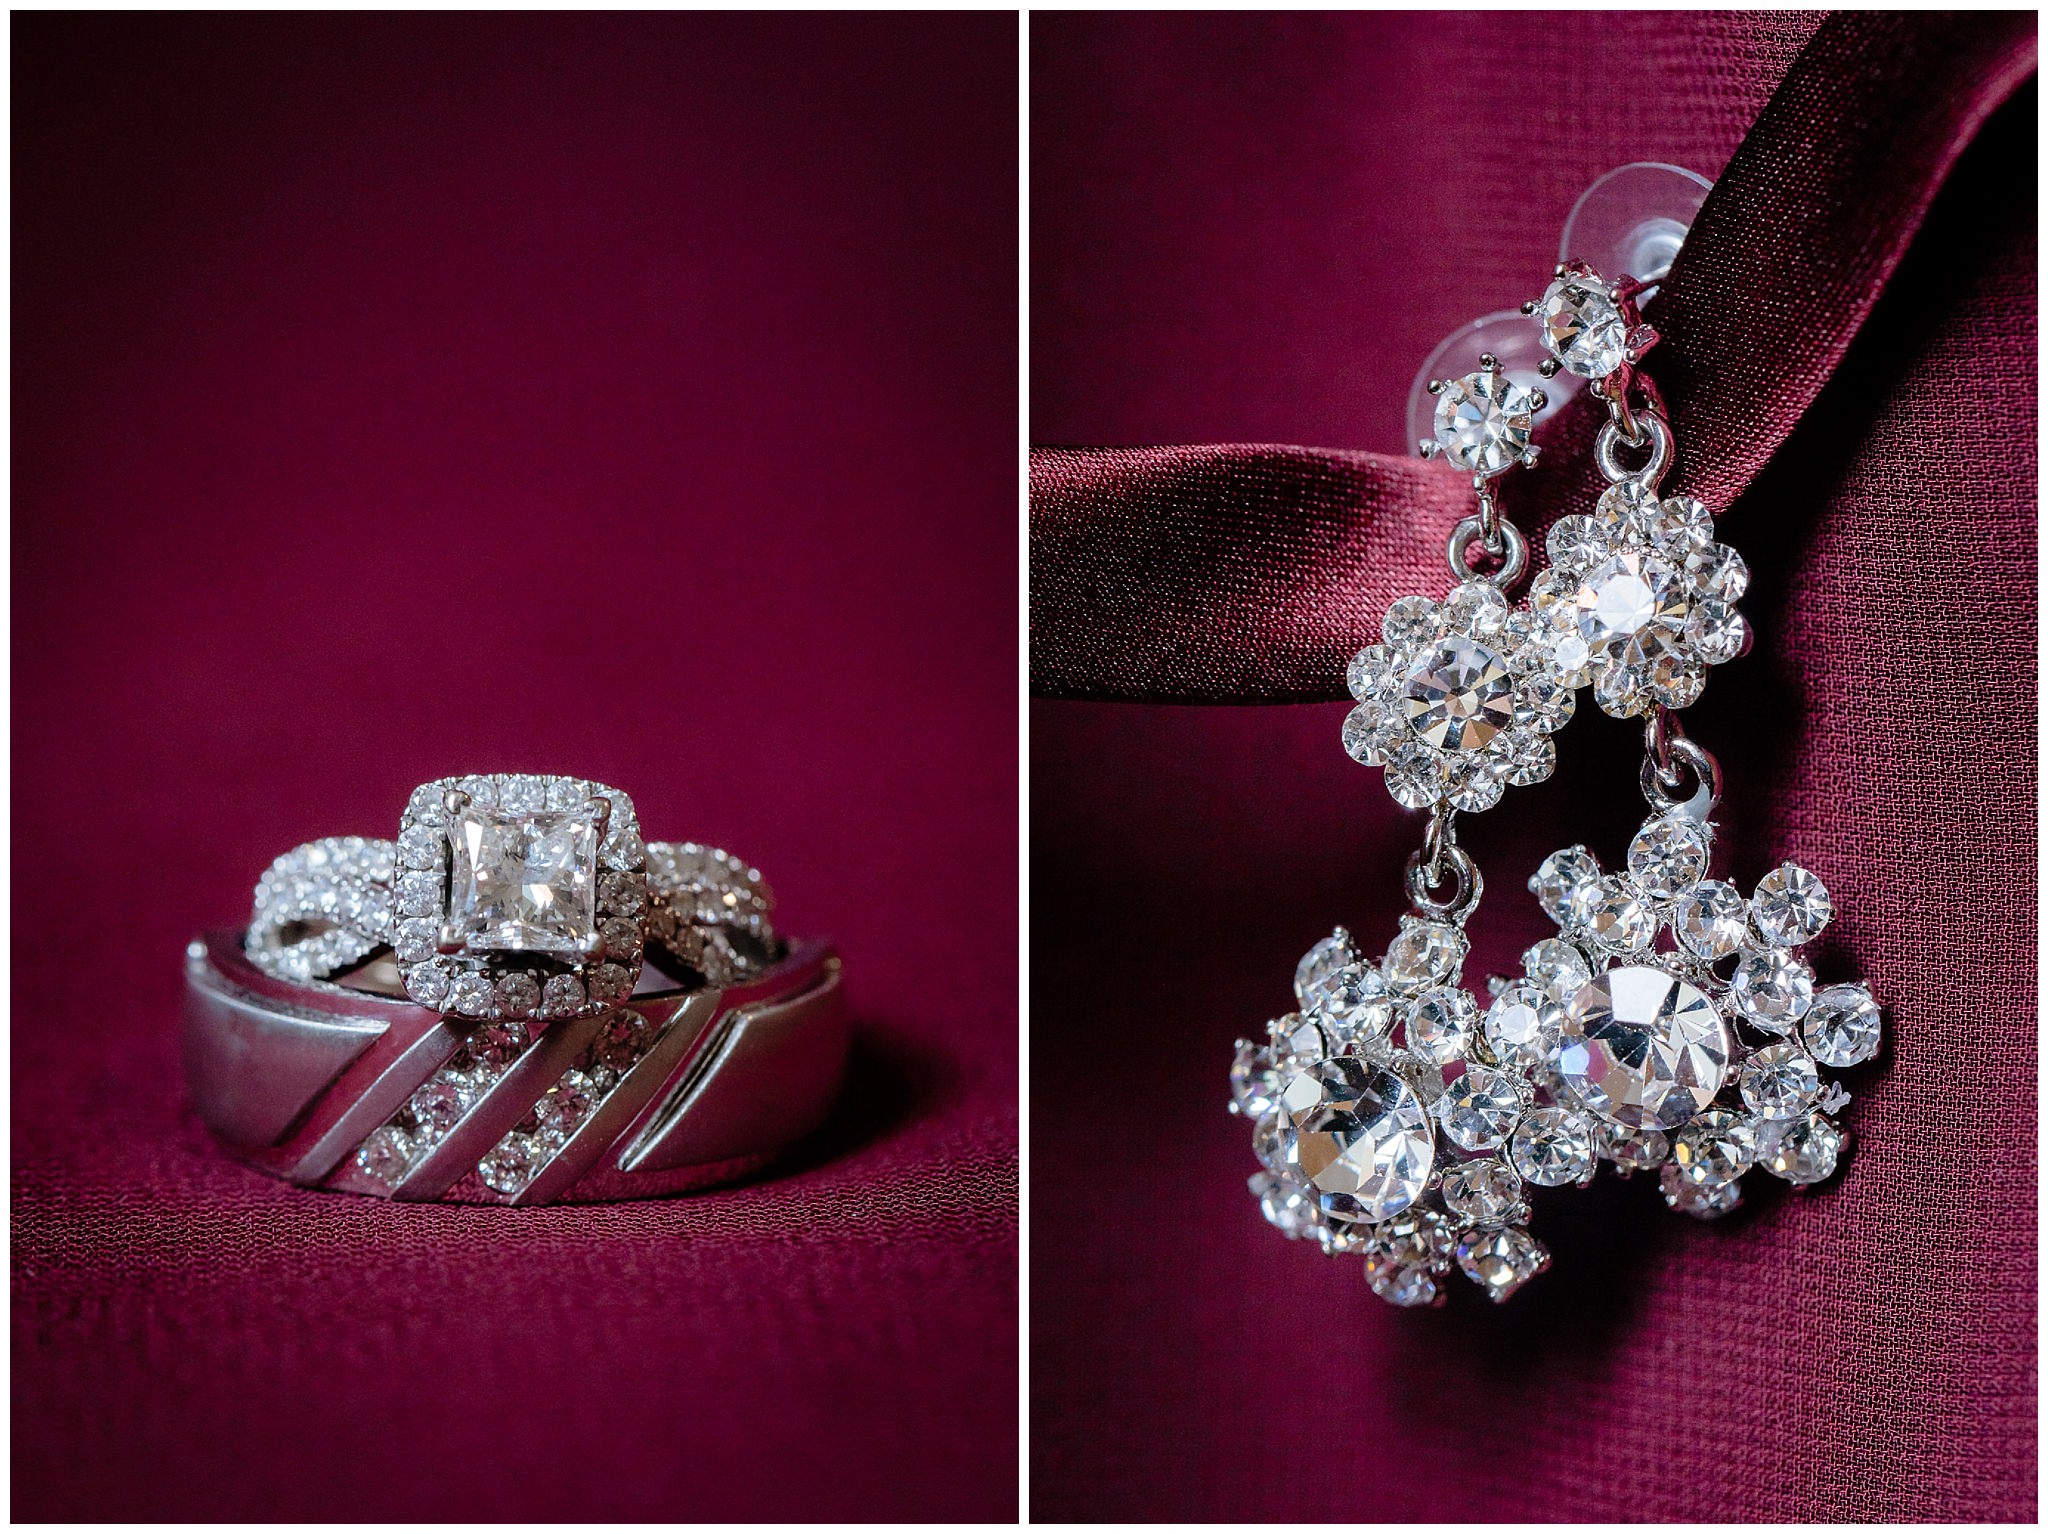 Wedding bands from Jared & Zales and bride's diamond earrings on a burgundy background